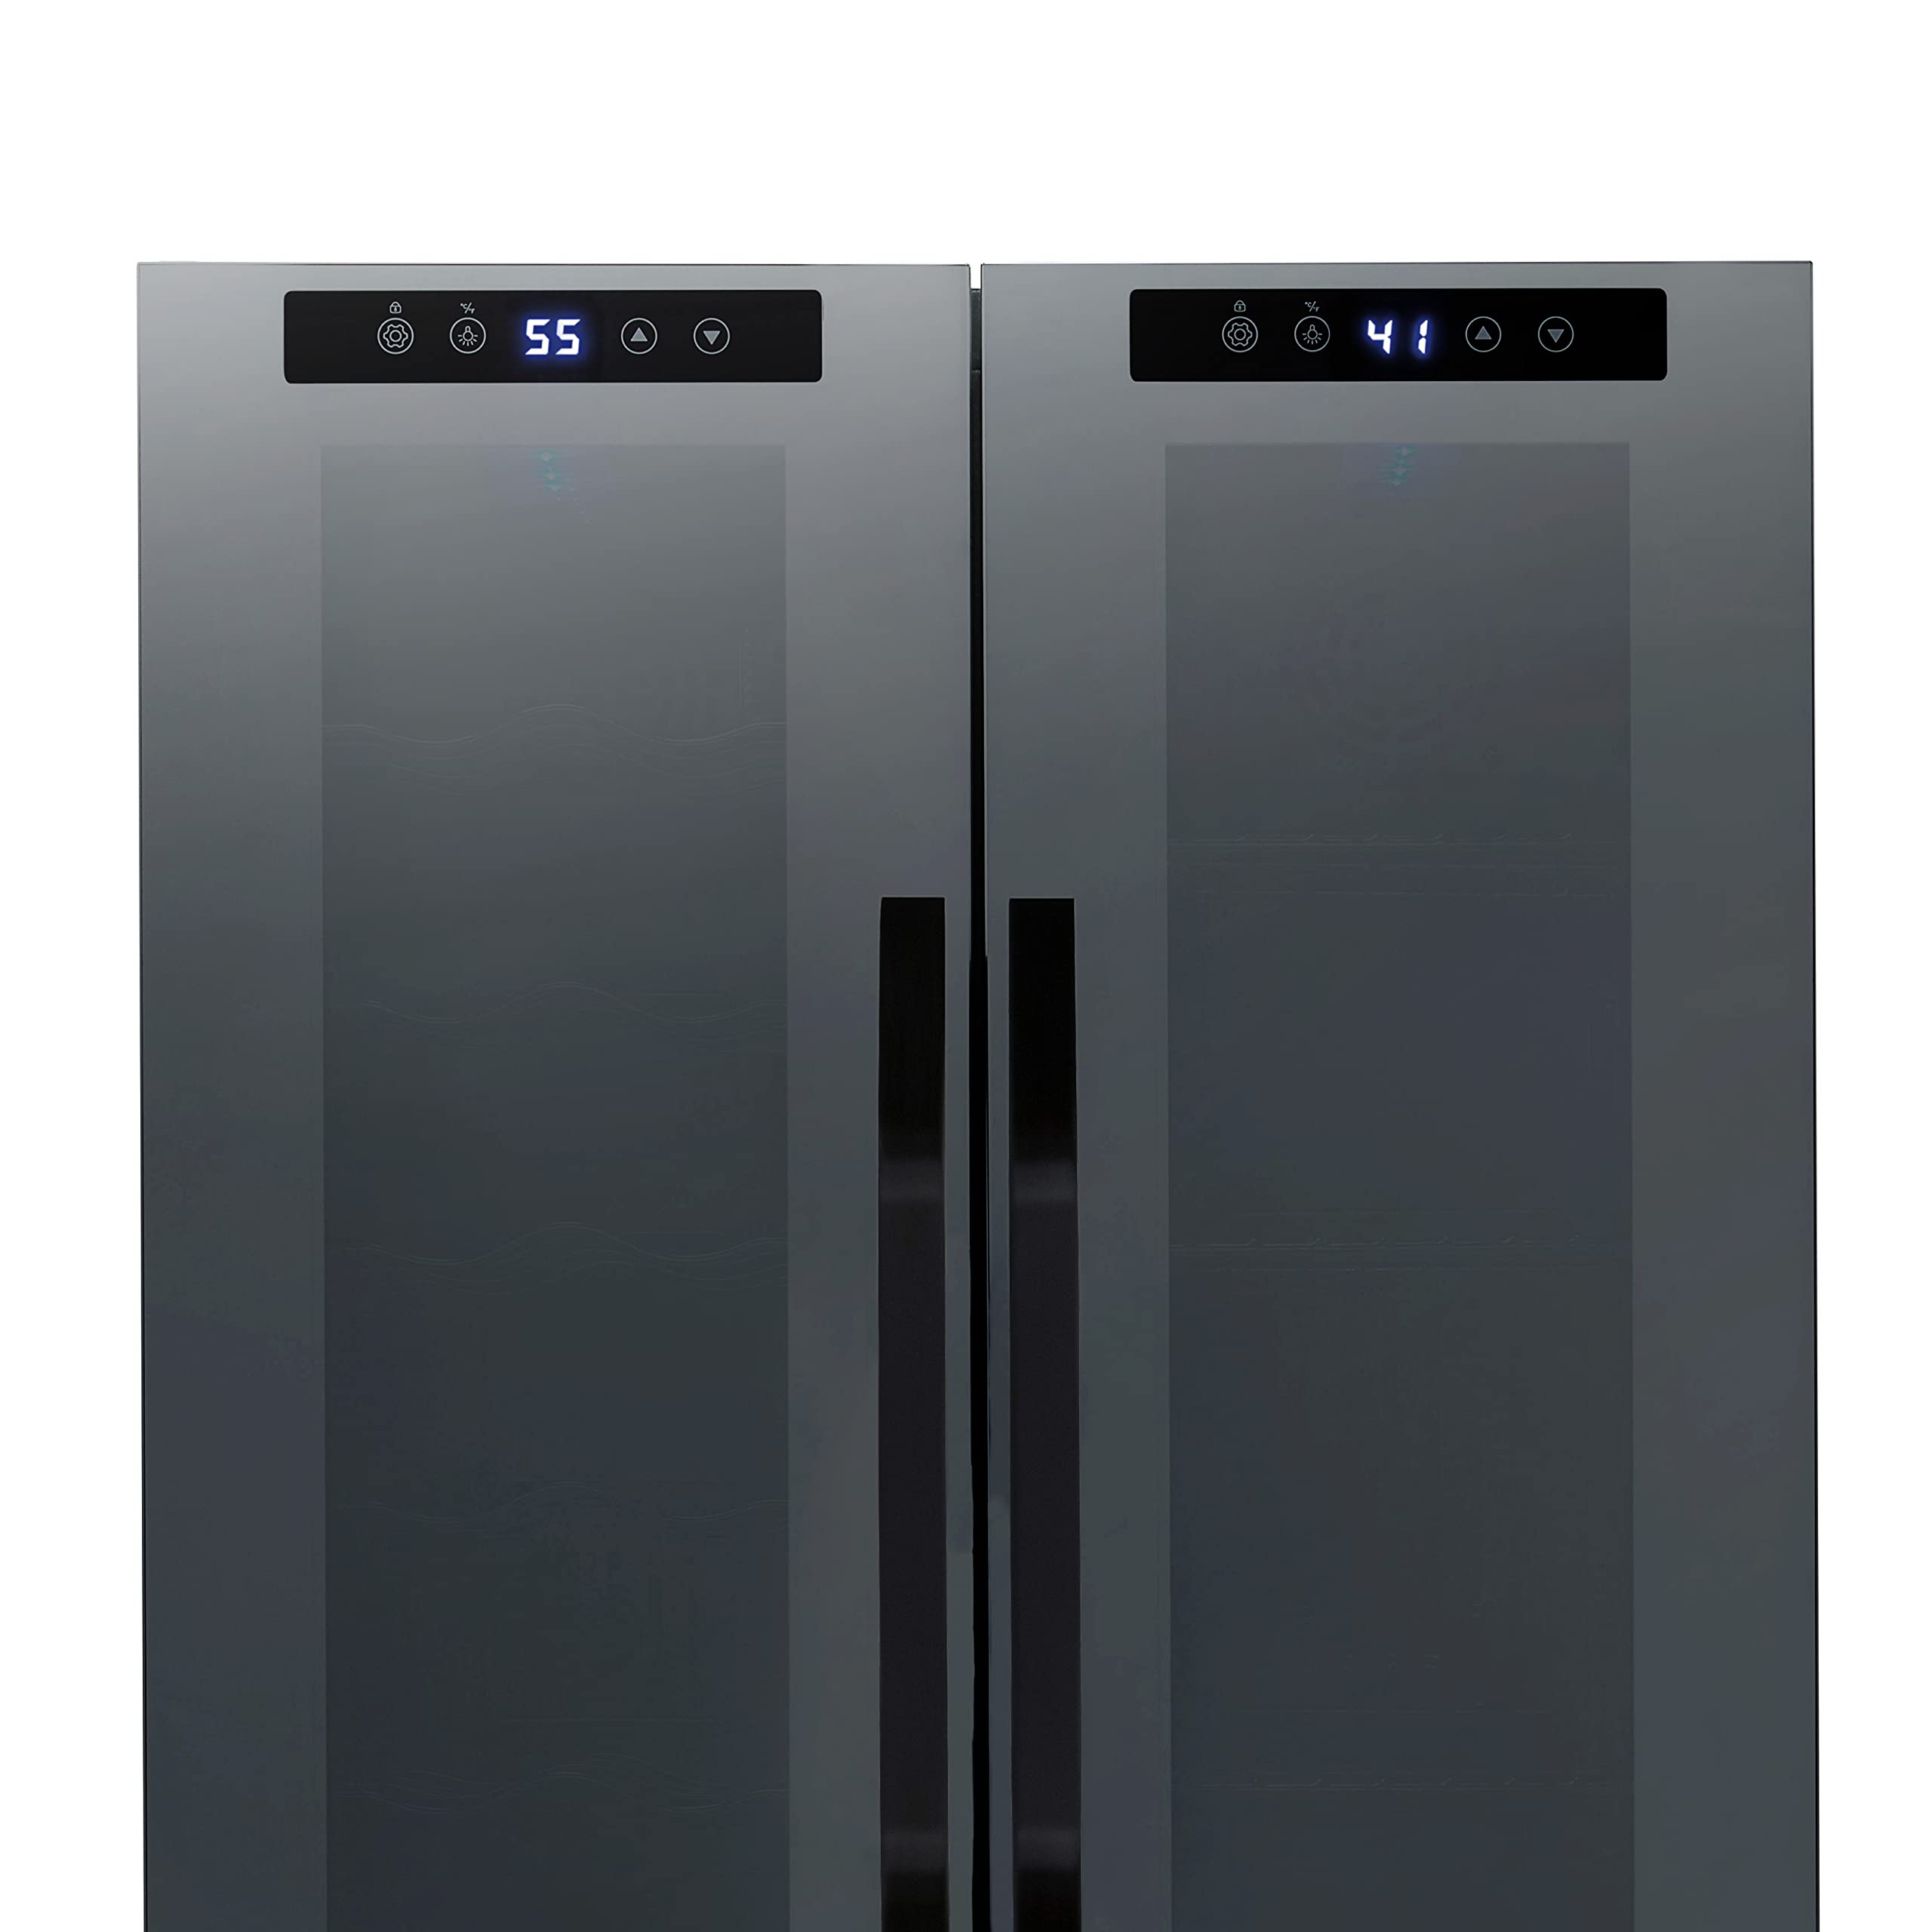 NewAir 12 Bottle/ 39 Can Wine Cooler Refrigerator | Shadow Series | Dual Temperature Zones, Freestanding Mirrored Wine and Beverage Fridge with Double-Layer Tempered Glass Door & Compressor Cooling